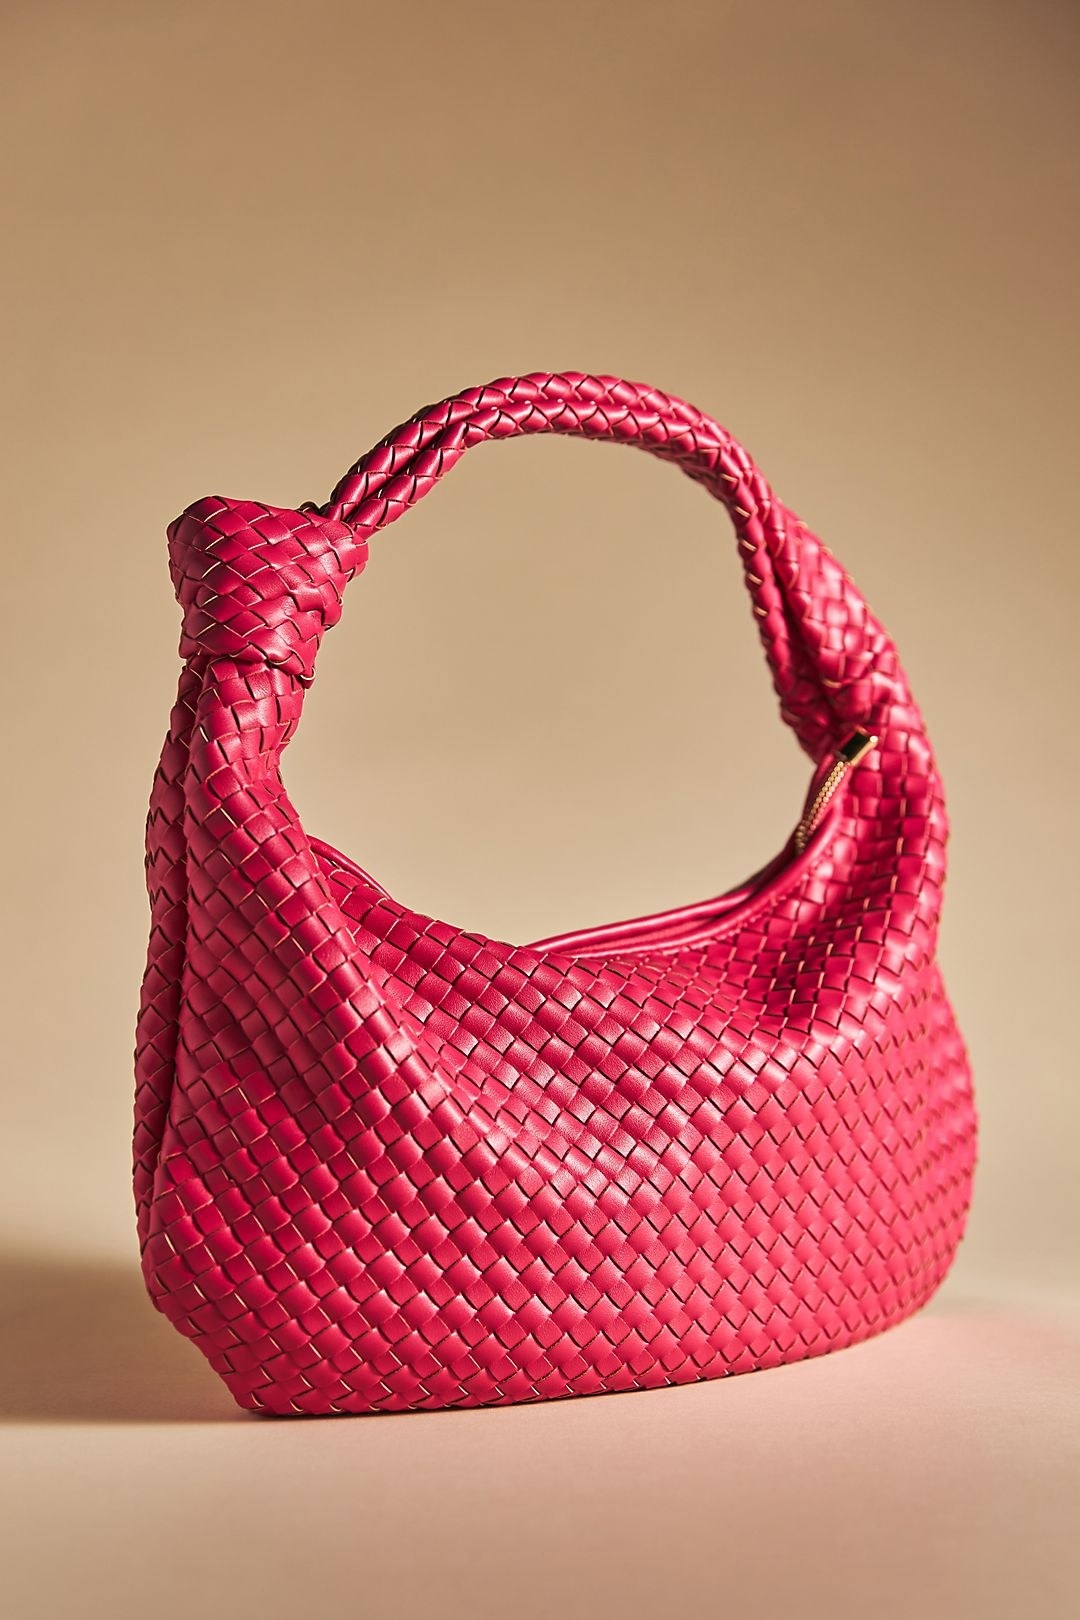 hot pink woven satchel bag with a knotted handle